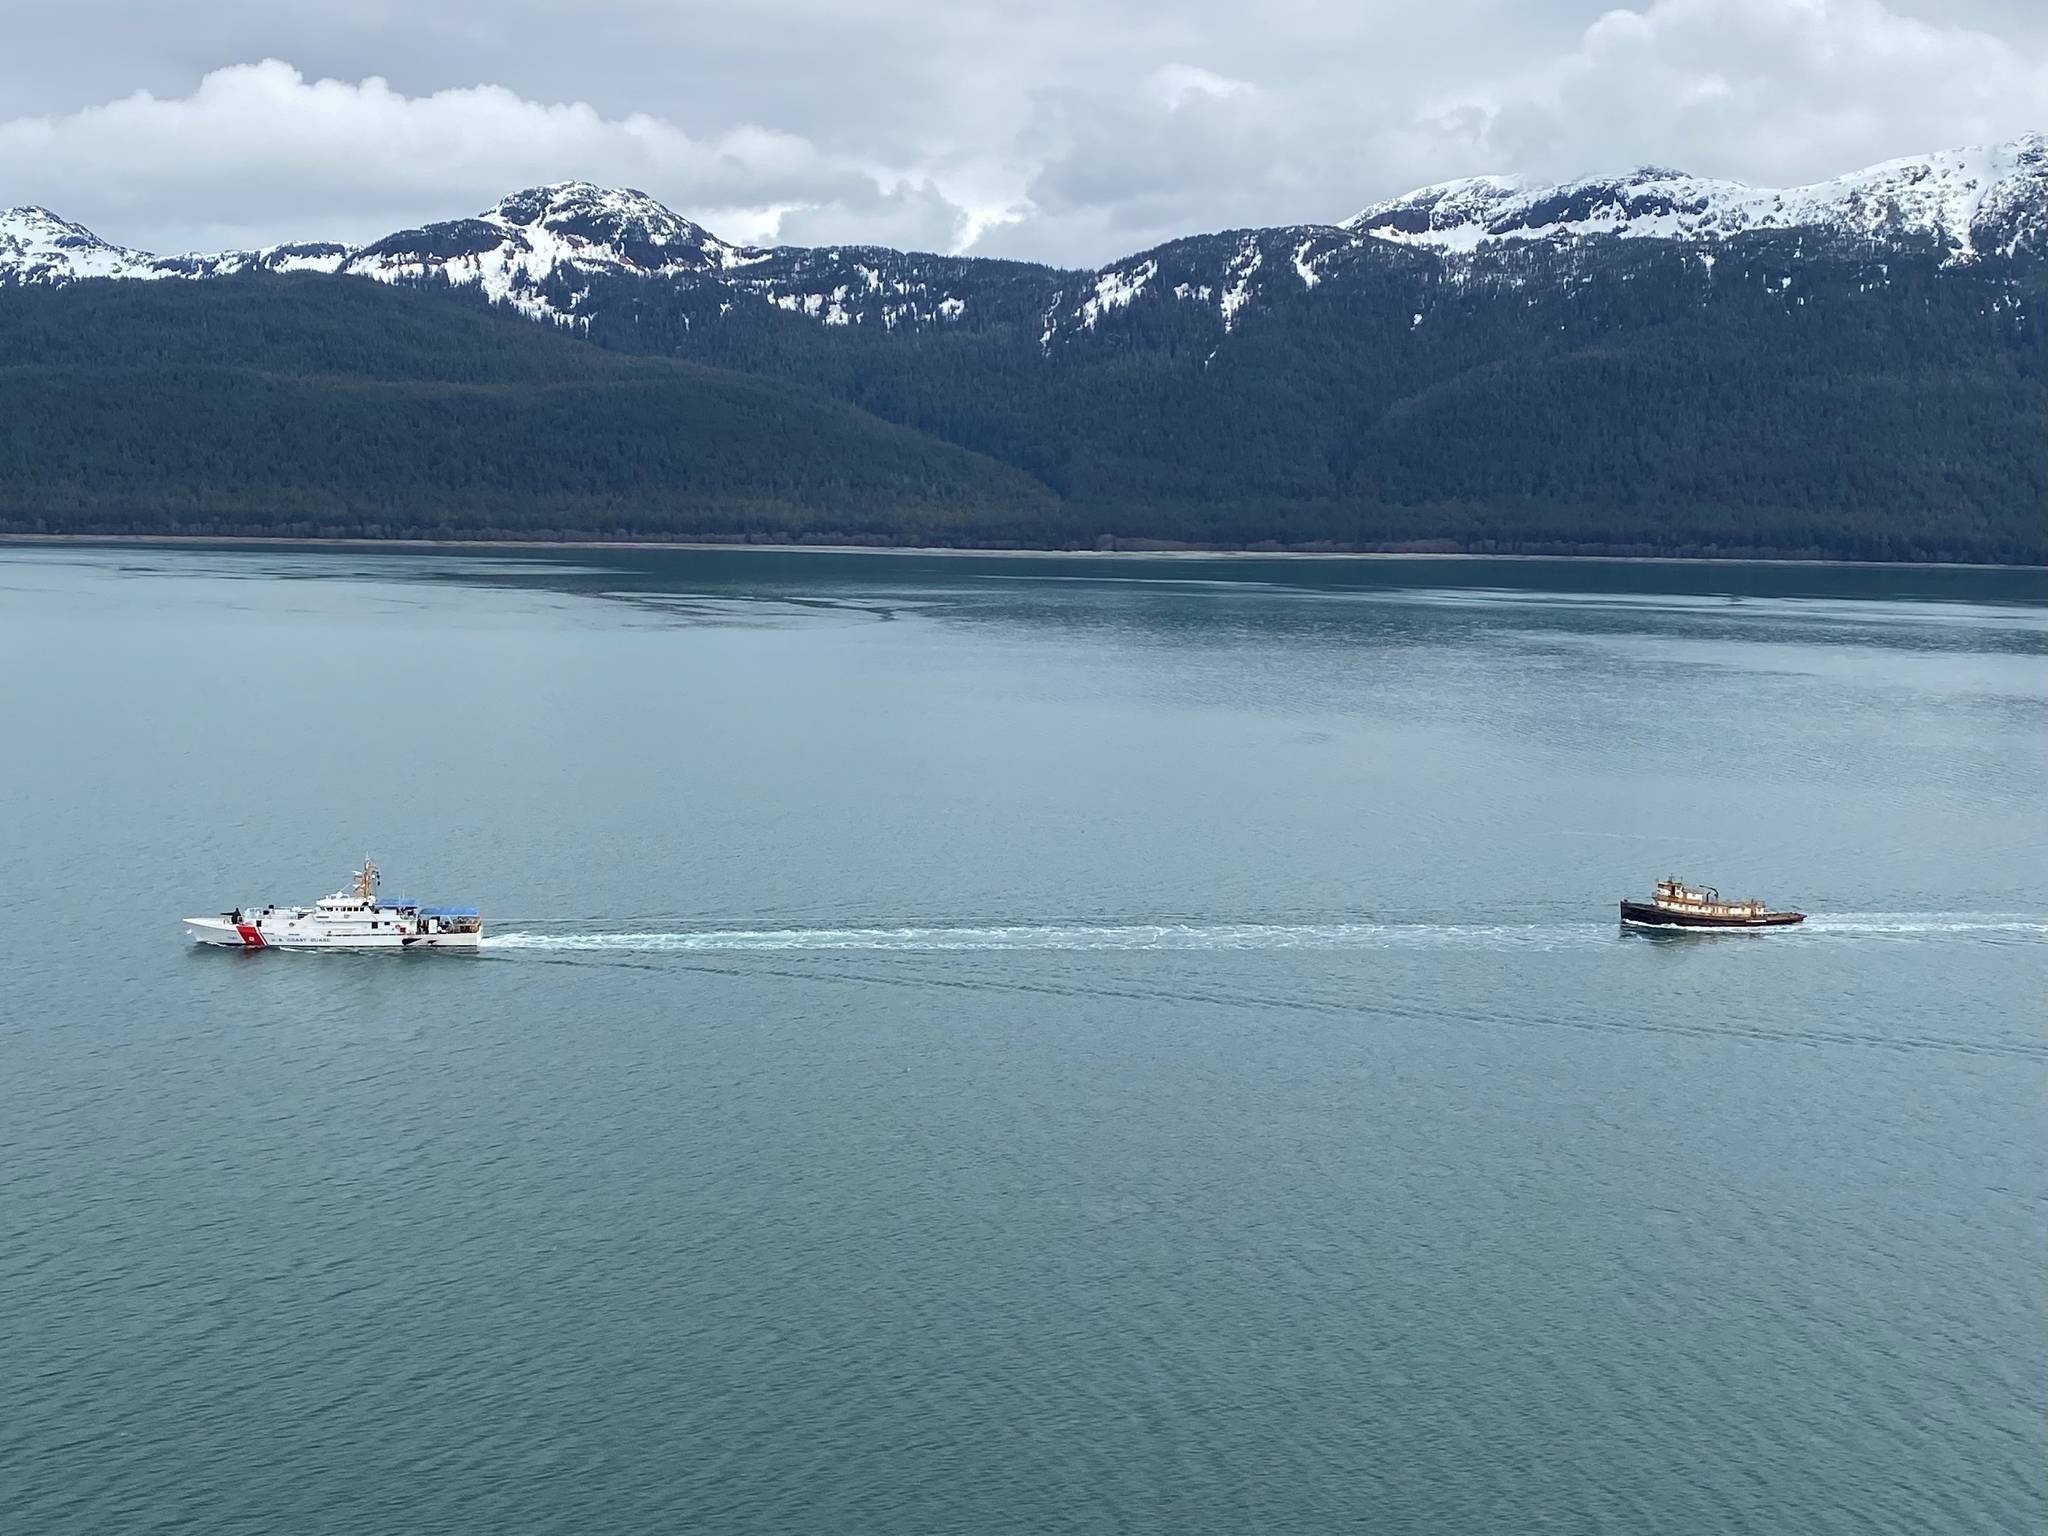 Coast Guard Cutter John McCormick, a 154-foot Sentinel–class vessel, towed the derelict tugboat Lumberman, to a position 54 miles west of Cross Sound, Alaska, on May 2, 2021. The 107-ft steel hulled tugboat was scuttled in over 8,400 feet of water. (Courtesy photo / U.S. Coast Guard)